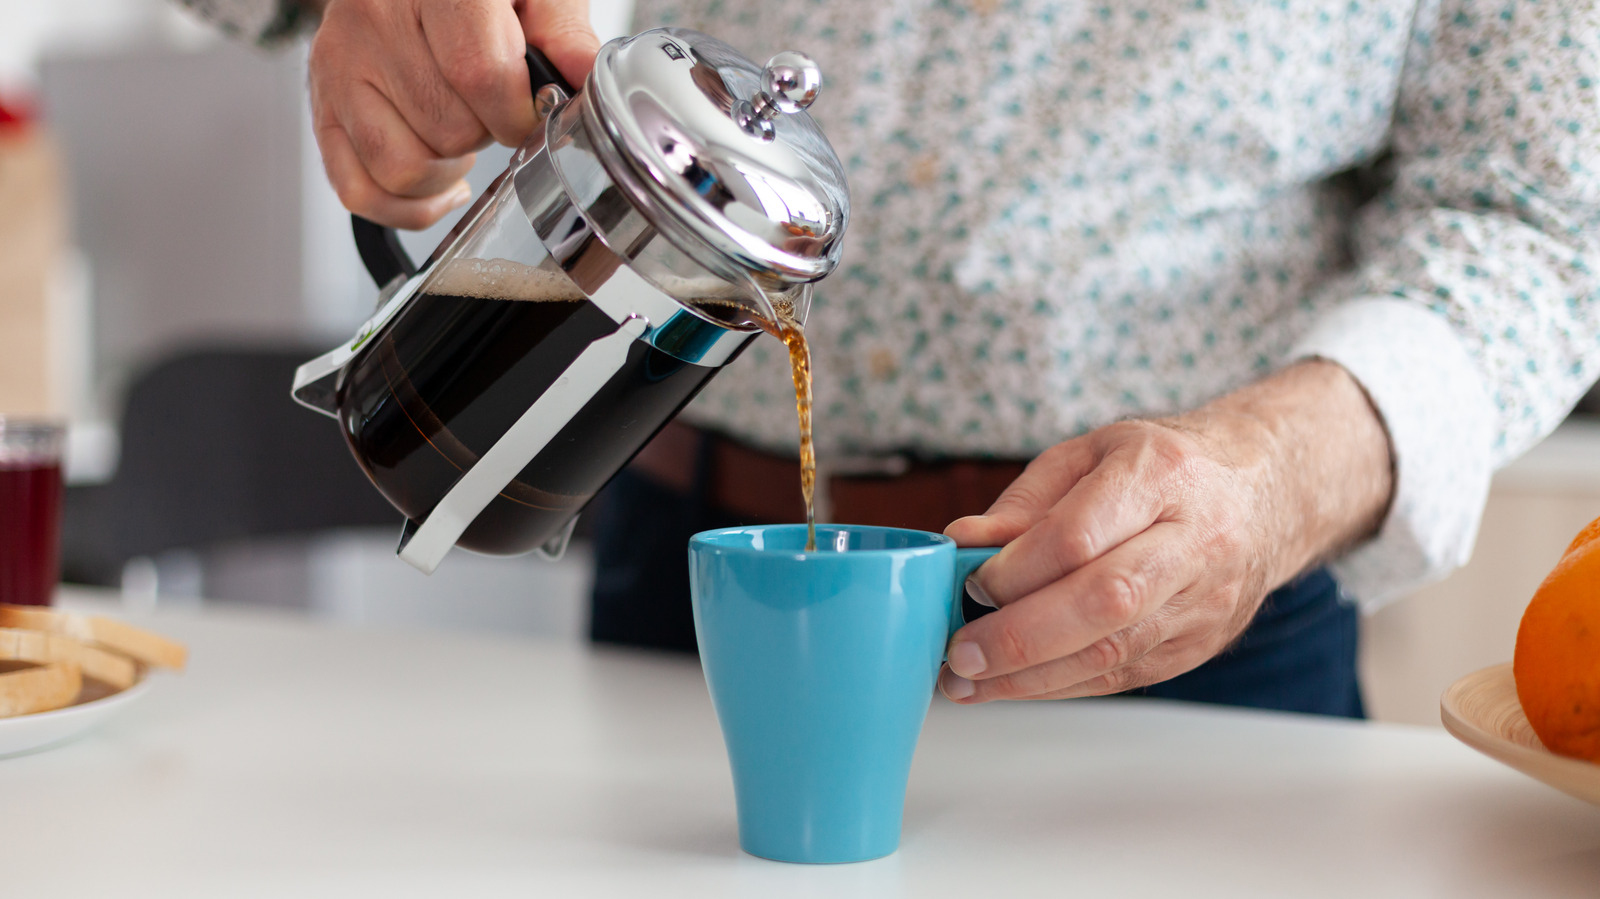 https://www.thedailymeal.com/img/gallery/why-the-humble-french-press-is-still-one-of-the-best-ways-to-brew-coffee/l-intro-1704133942.jpg